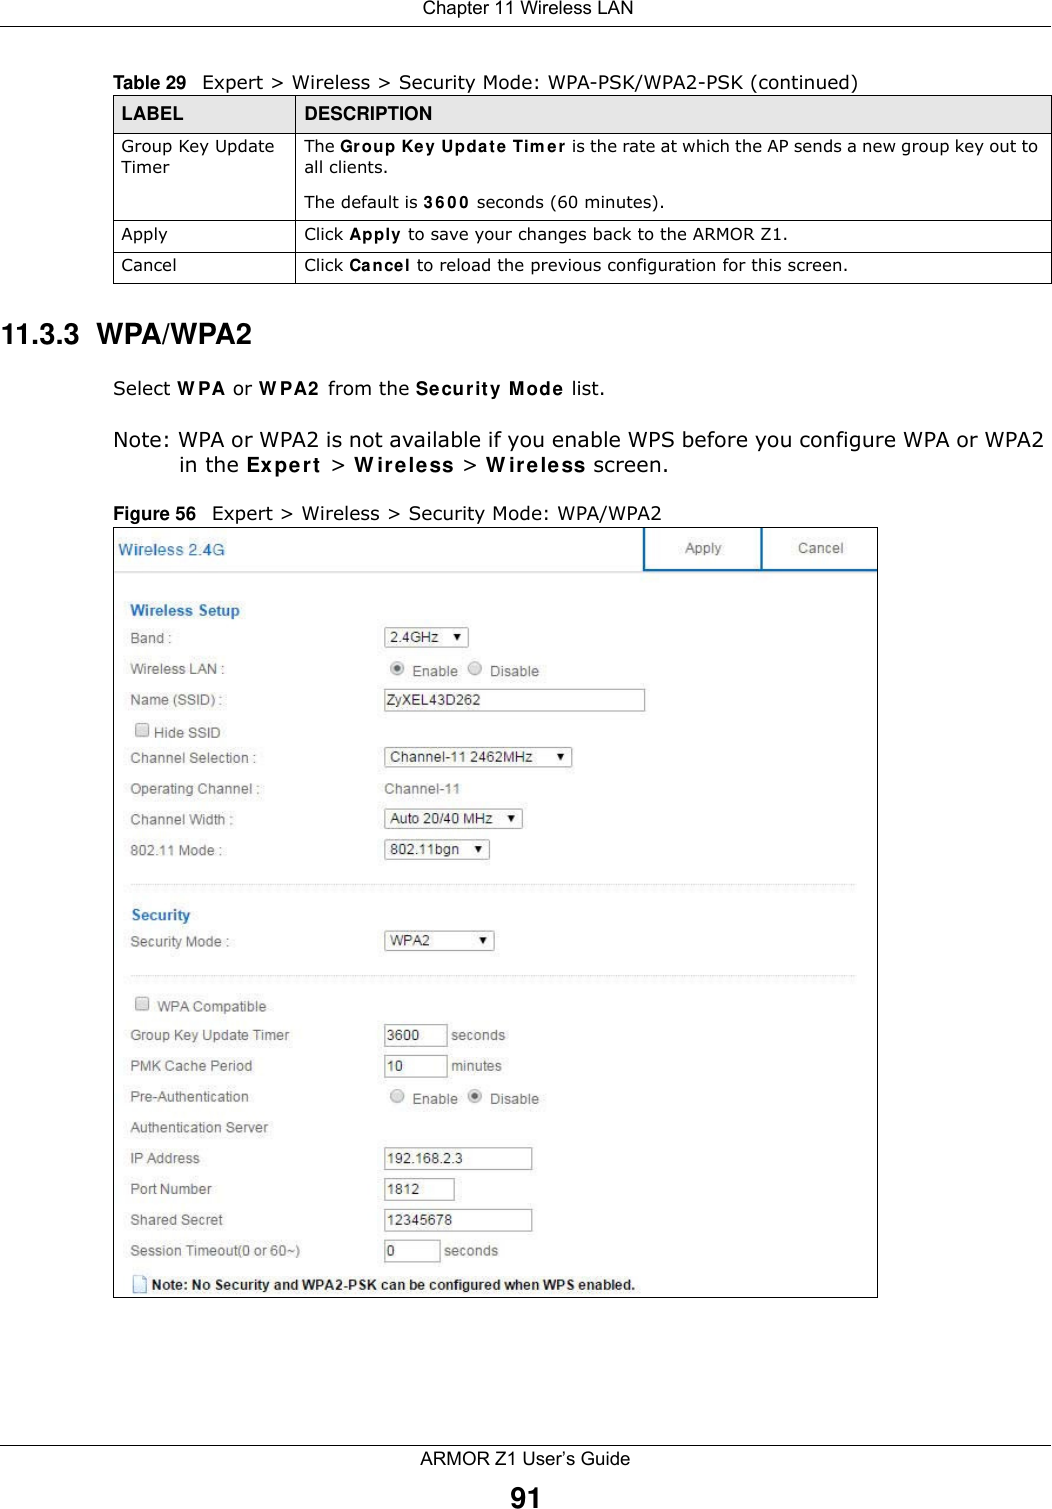  Chapter 11 Wireless LANARMOR Z1 User’s Guide9111.3.3  WPA/WPA2Select WPA or WPA2 from the Security Mode list. Note: WPA or WPA2 is not available if you enable WPS before you configure WPA or WPA2 in the Expert &gt; Wireless &gt; Wireless screen.Figure 56   Expert &gt; Wireless &gt; Security Mode: WPA/WPA2Group Key Update TimerThe Group Key Update Timer is the rate at which the AP sends a new group key out to all clients. The default is 3600 seconds (60 minutes).Apply Click Apply to save your changes back to the ARMOR Z1.Cancel Click Cancel to reload the previous configuration for this screen.Table 29   Expert &gt; Wireless &gt; Security Mode: WPA-PSK/WPA2-PSK (continued)LABEL DESCRIPTION